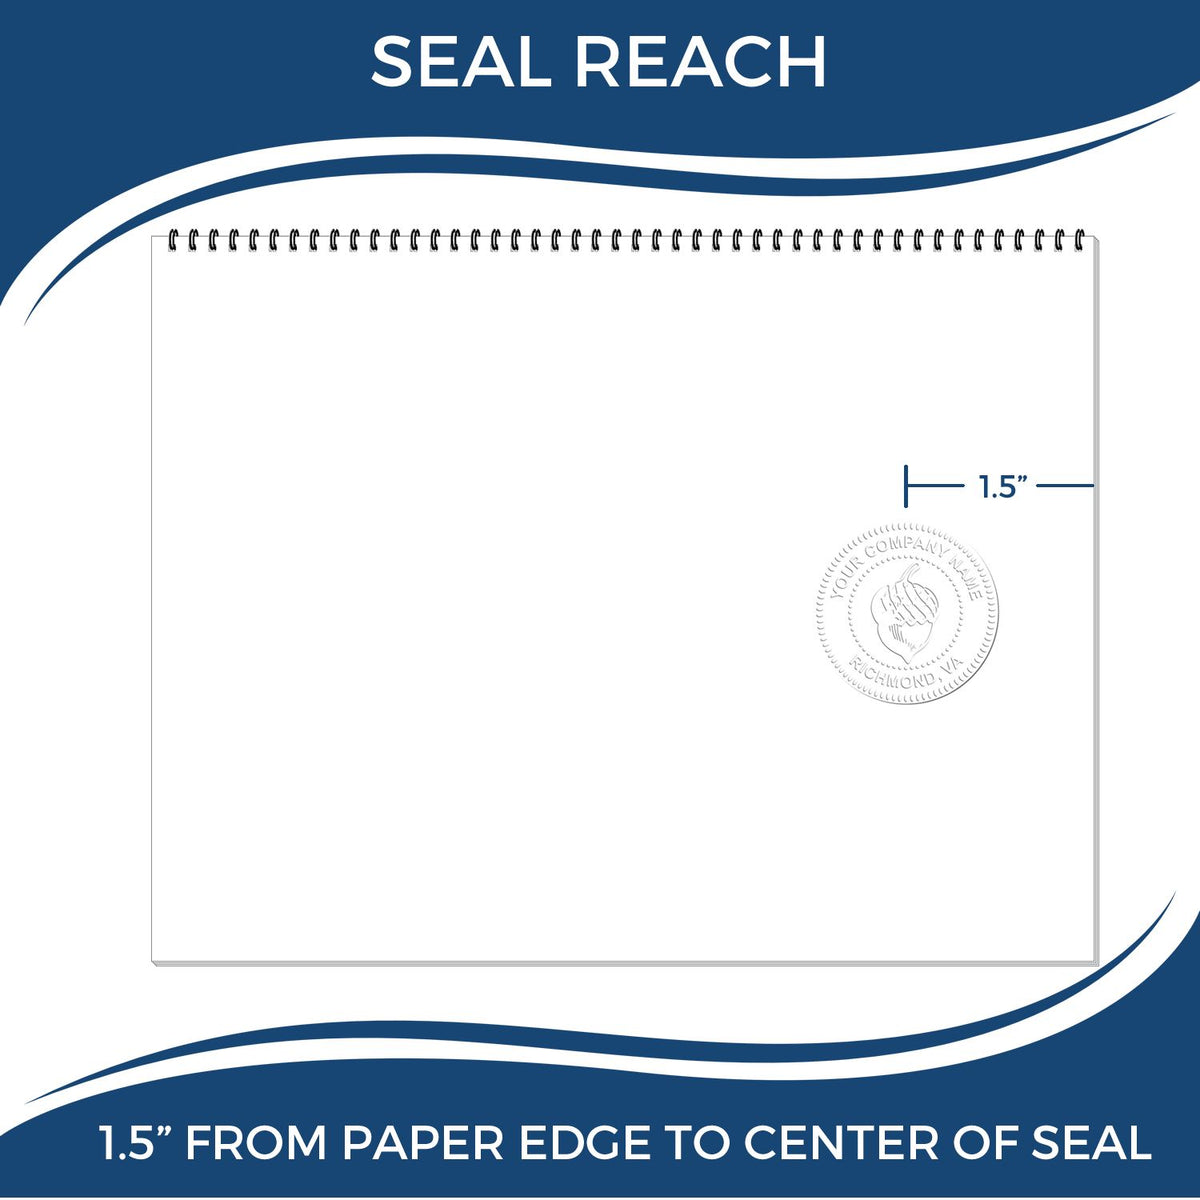 An infographic showing the seal reach which is represented by a ruler and a miniature seal image of the Gift North Carolina Landscape Architect Seal